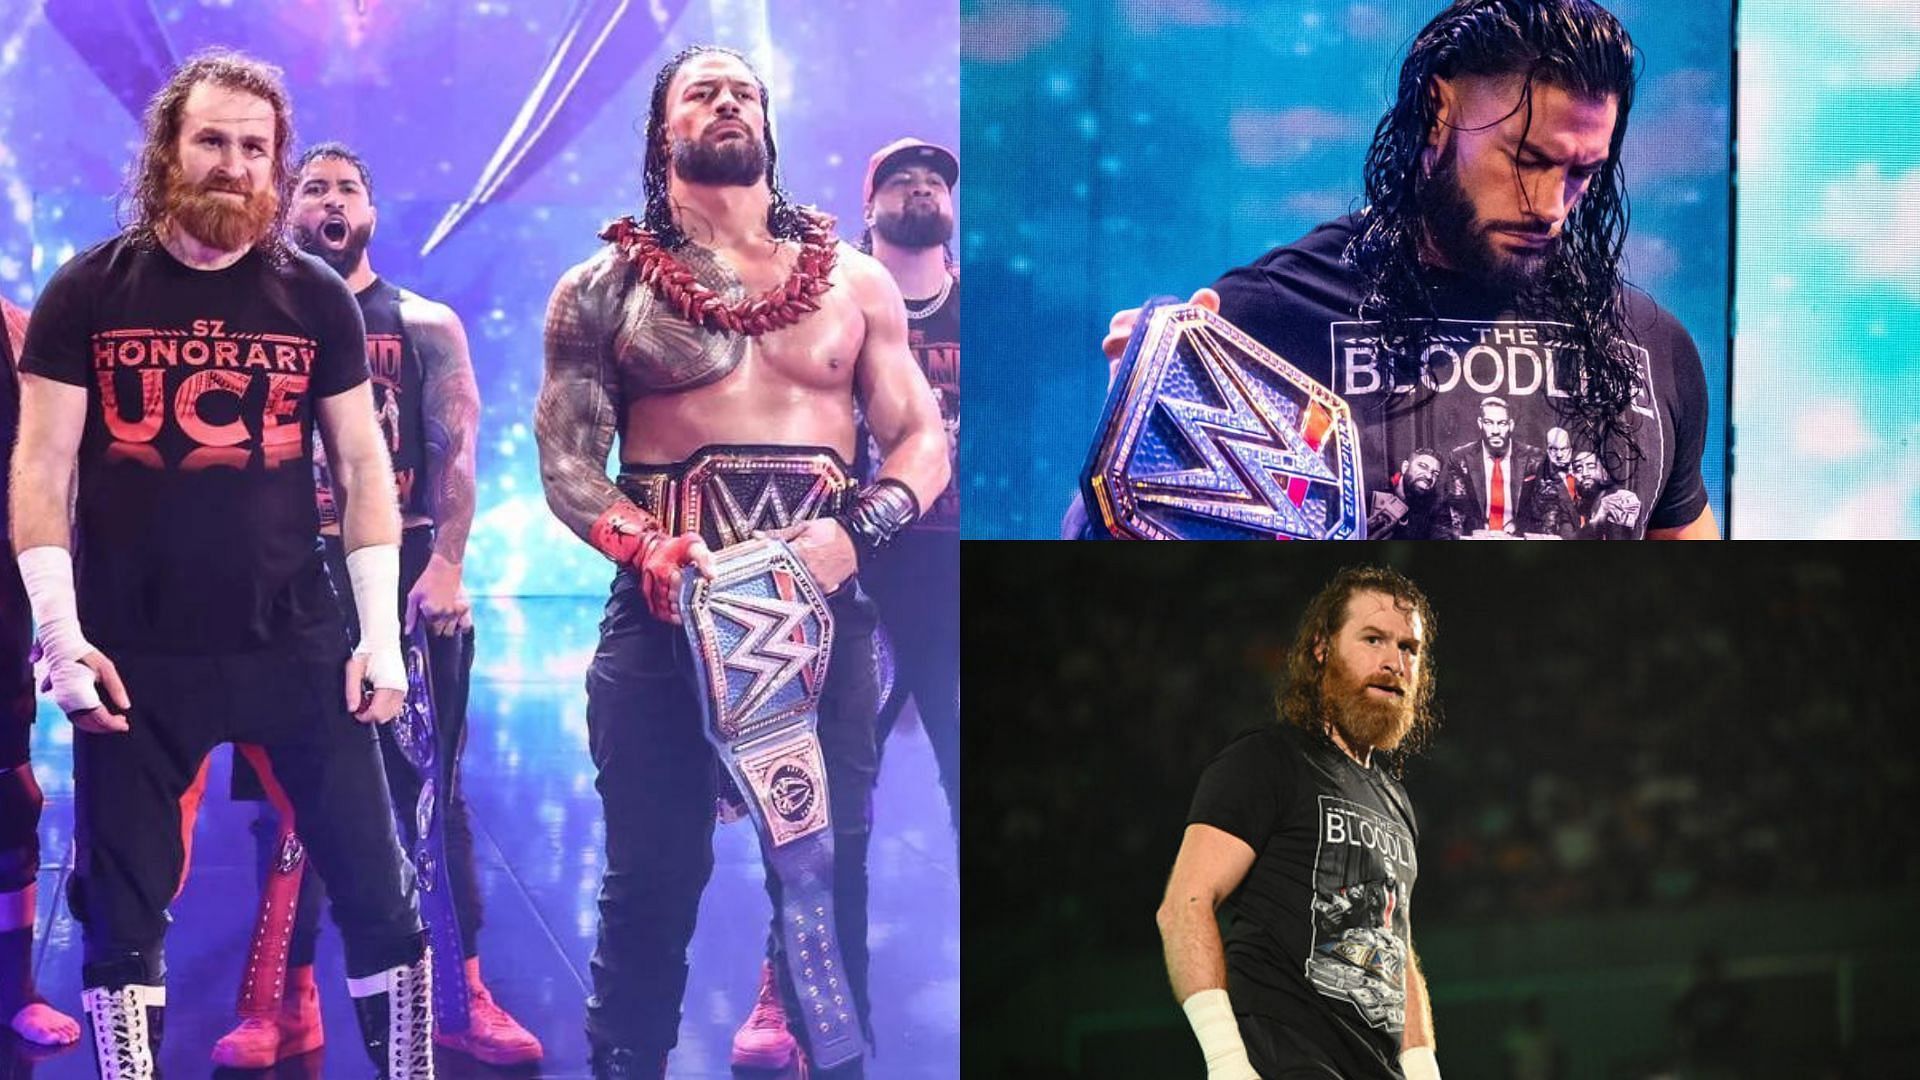 Roman Reigns and Sami Zayn are stablemates in The Bloodline